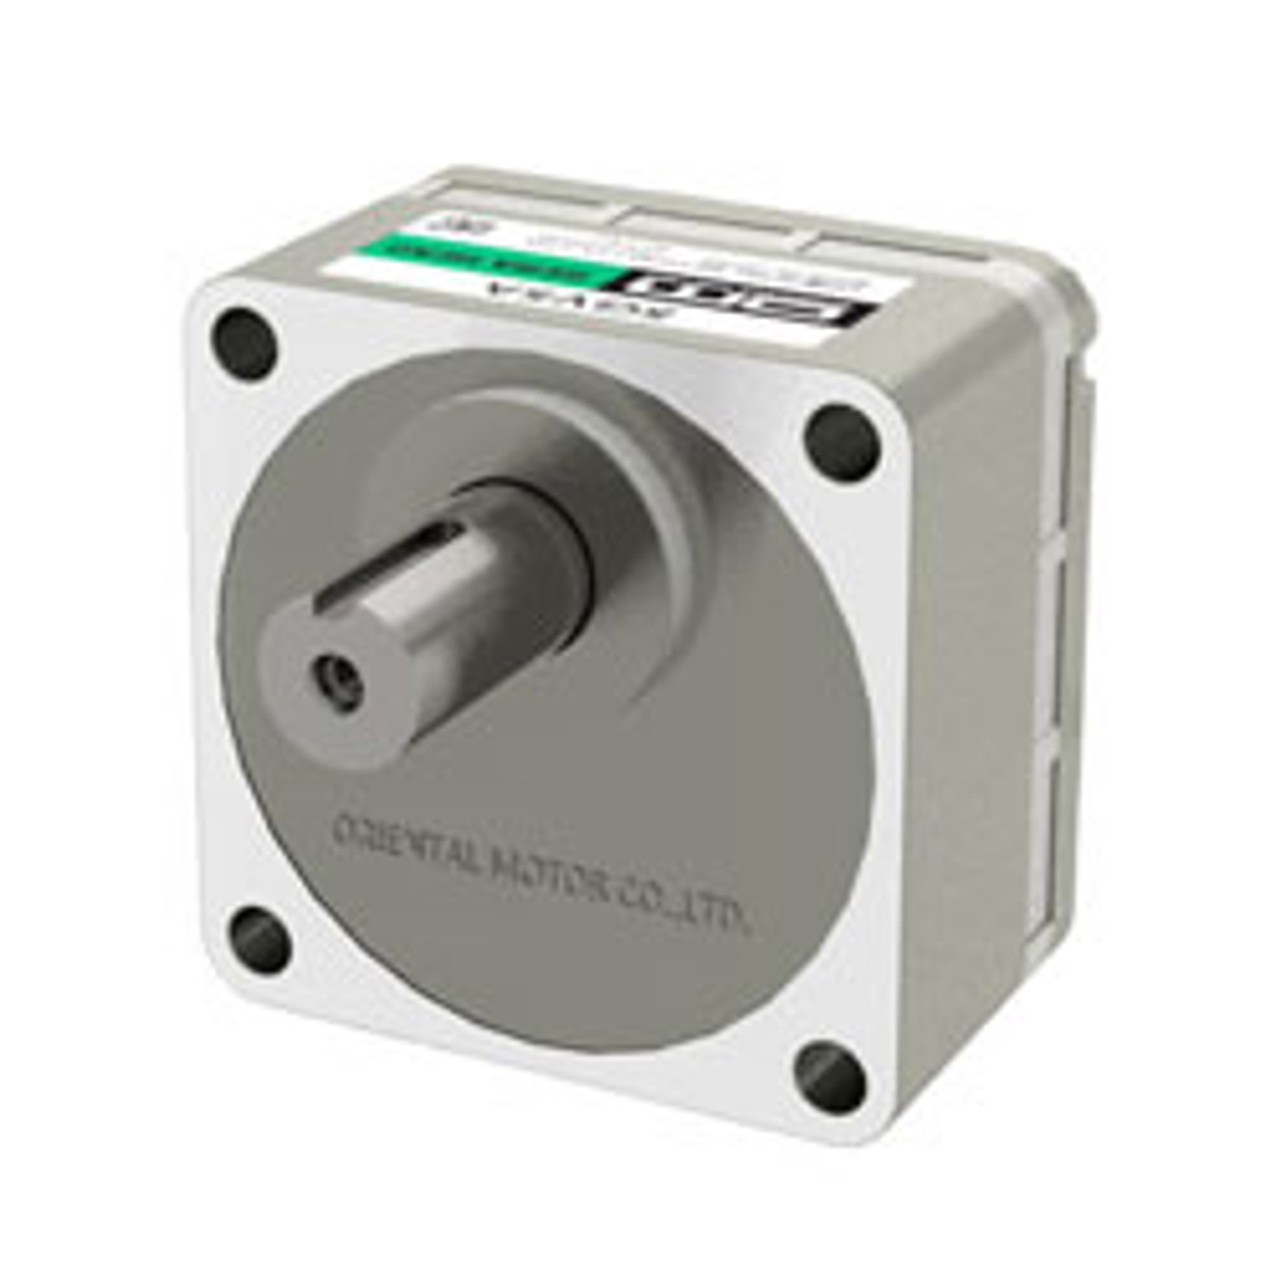 5GVR15A - Product Image